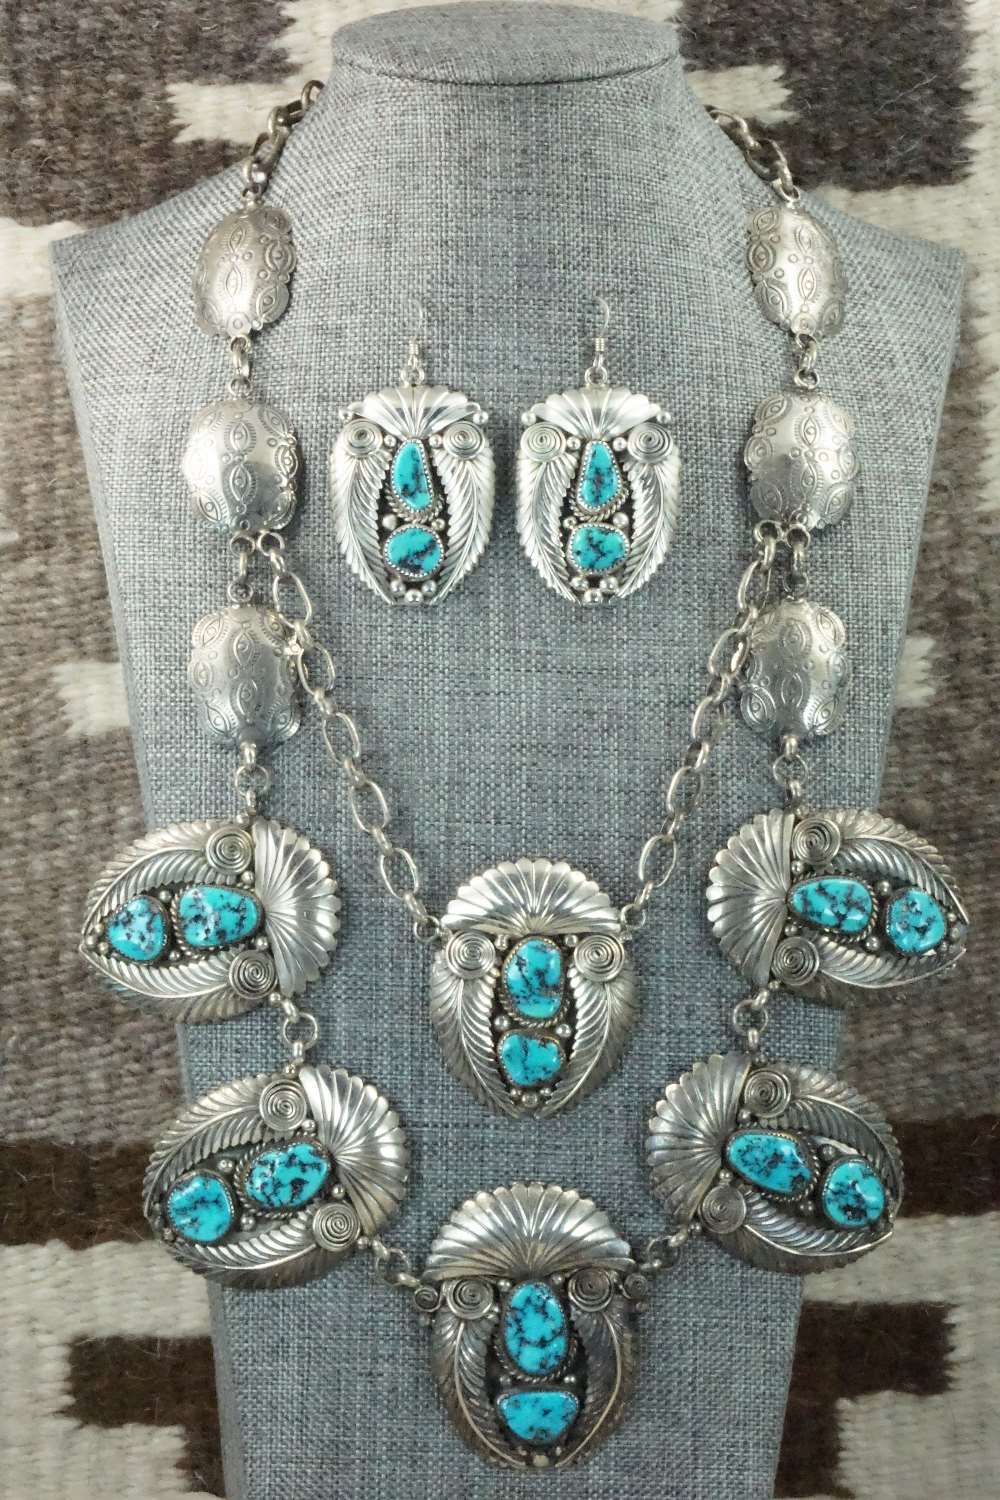 Turquoise & Sterling Silver Necklace and Earrings - Nora Tsosie